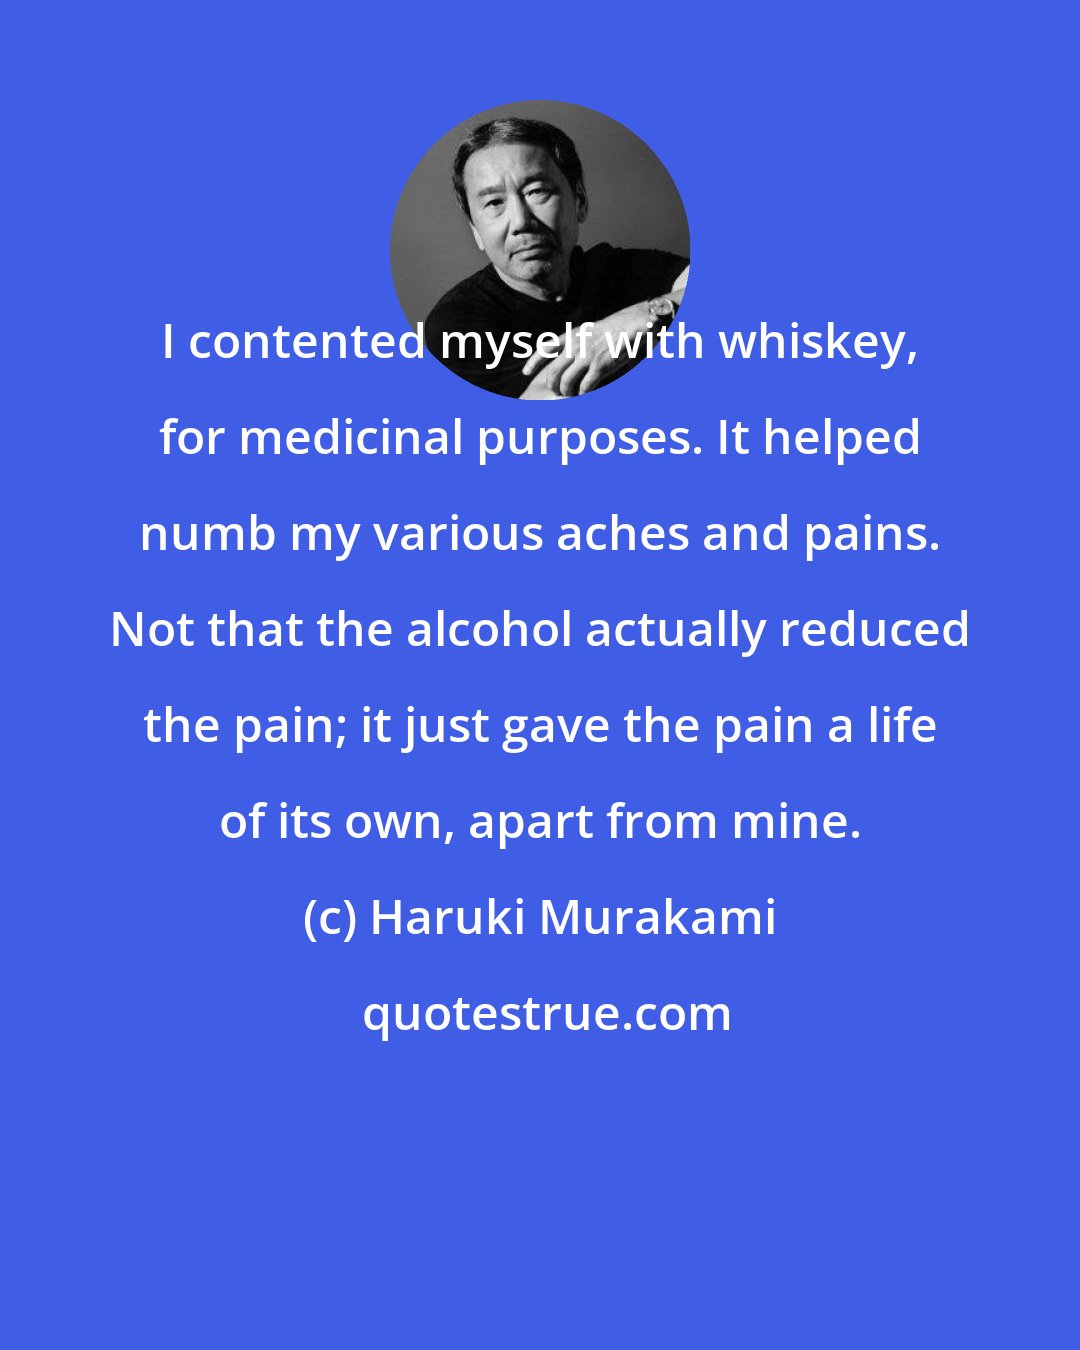 Haruki Murakami: I contented myself with whiskey, for medicinal purposes. It helped numb my various aches and pains. Not that the alcohol actually reduced the pain; it just gave the pain a life of its own, apart from mine.